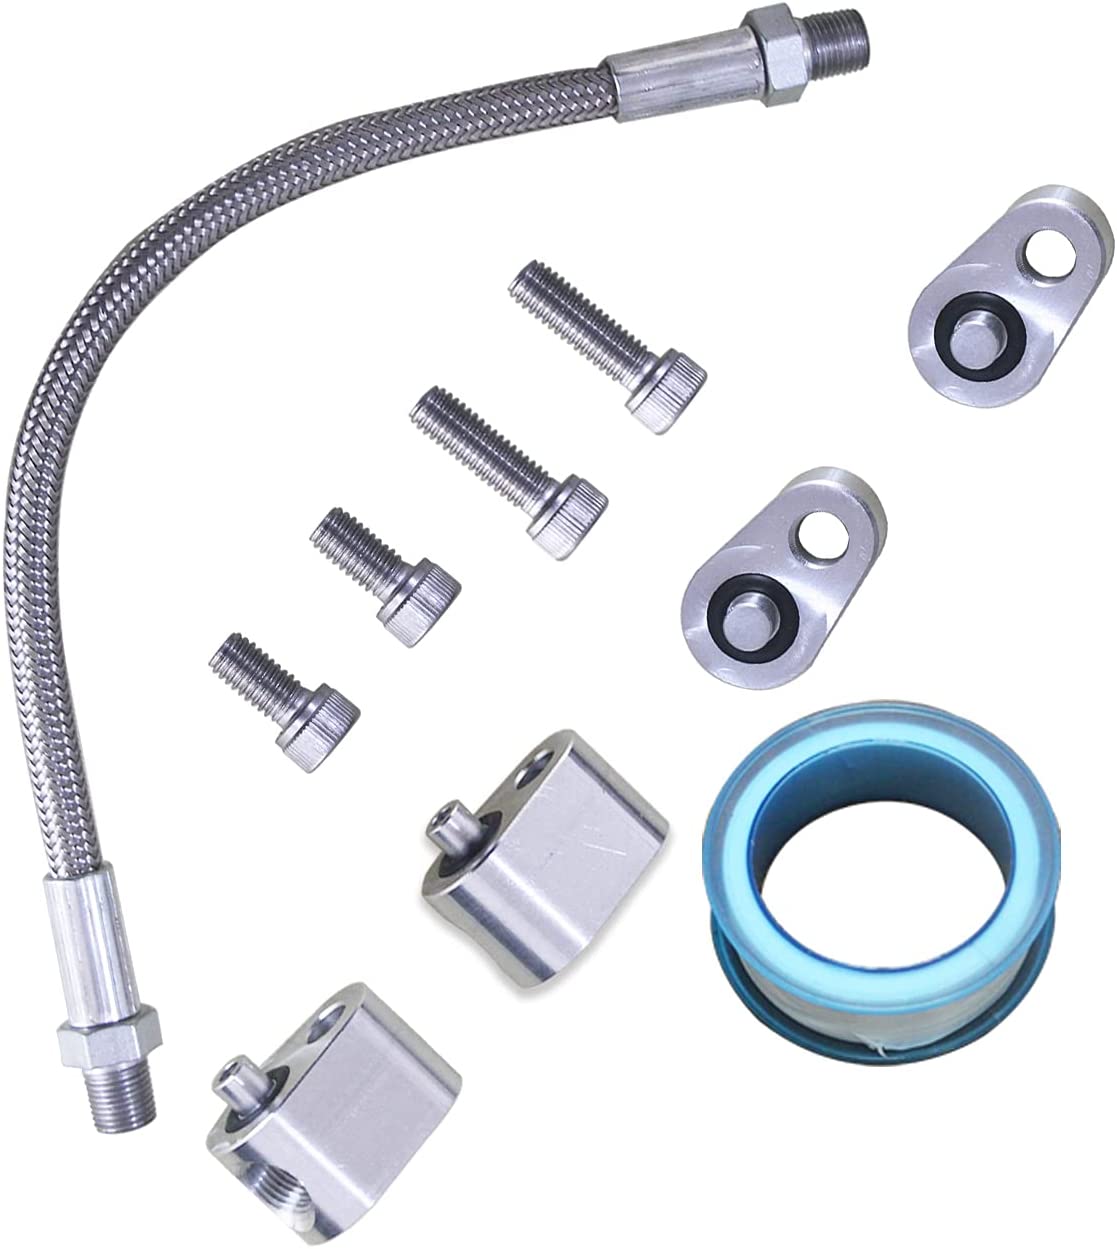 LS Throttle Body Bypass Hose kit LS Coolant / Steam Port Crossover Hose Kits Featured Image